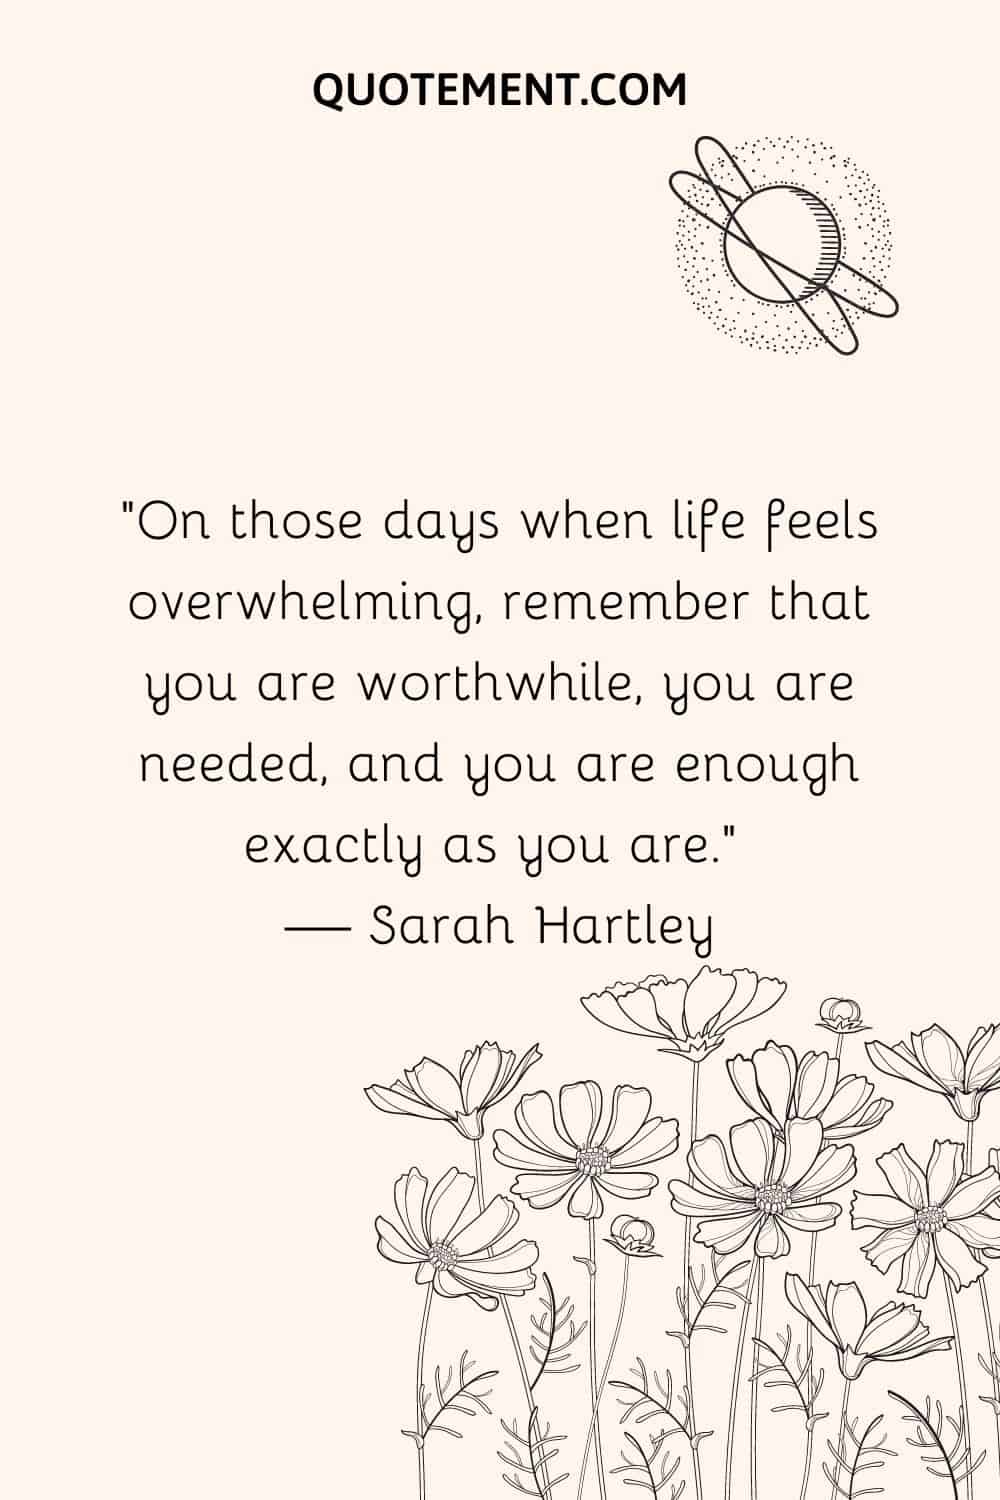 On those days when life feels overwhelming, remember that you are worthwhile, you are needed, and you are enough exactly as you are